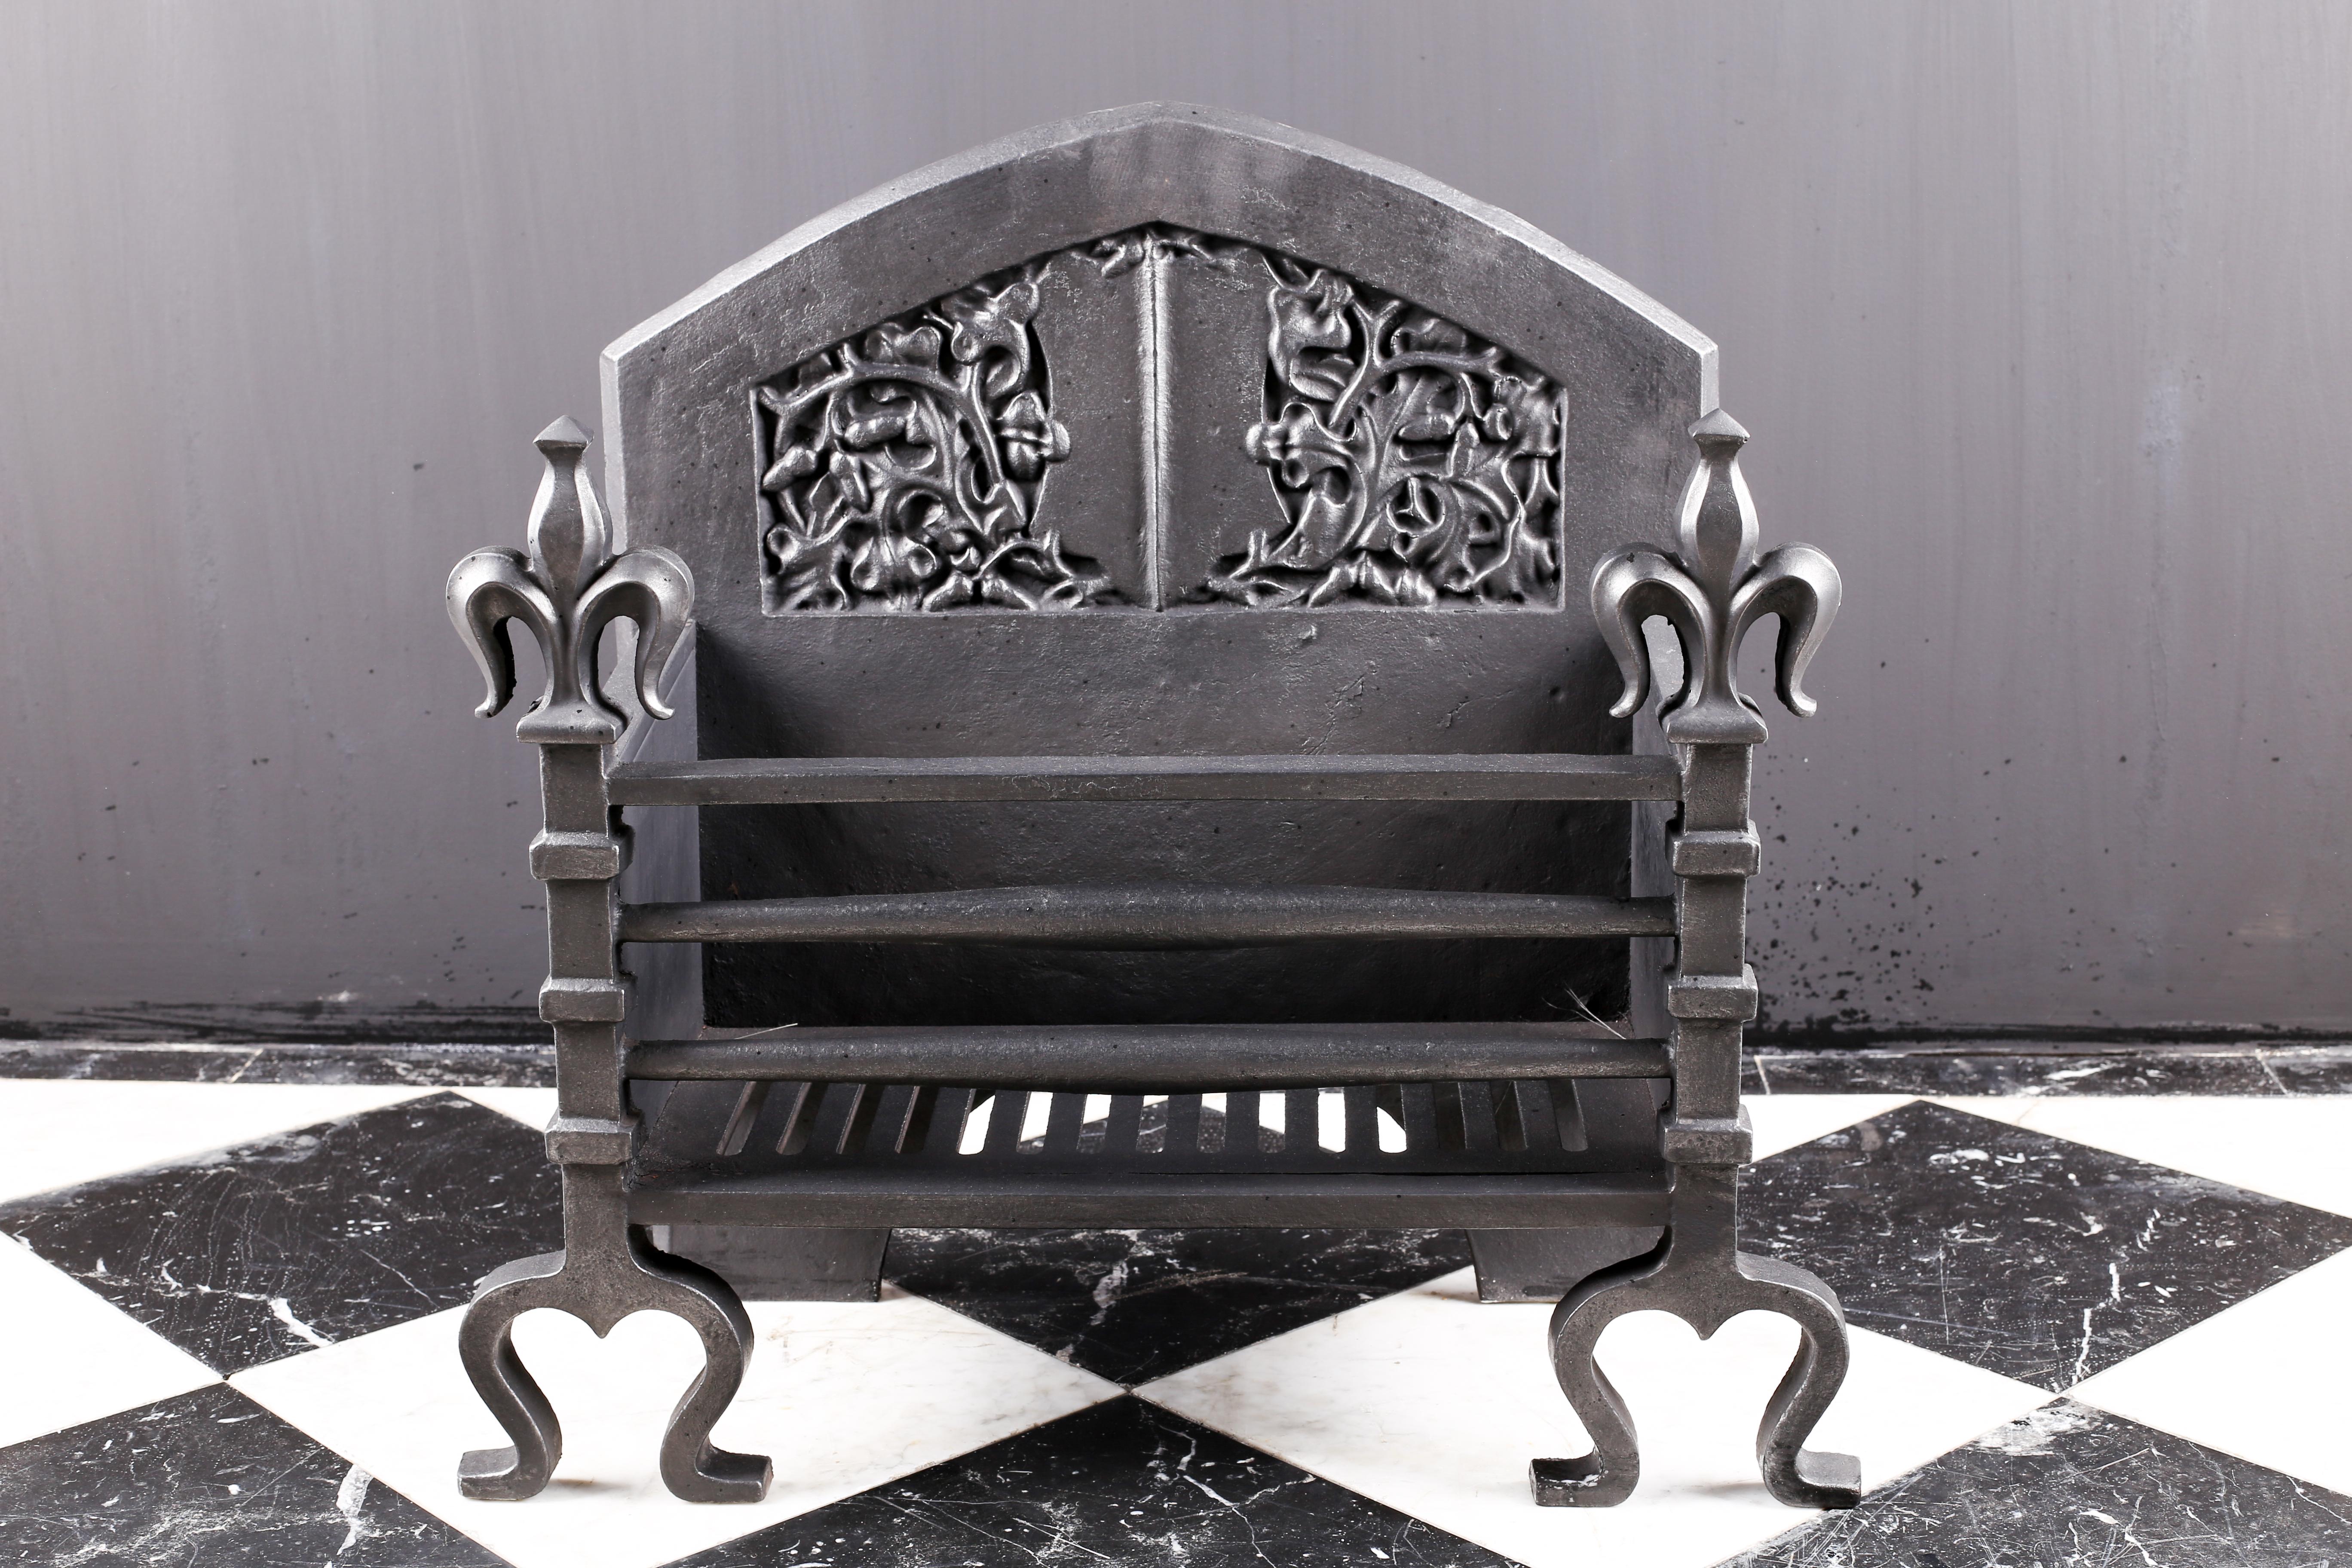 A cast iron Arts & Crafts Victorian fire grate in the Renaissance style, English 20th century.

Measures: Depth 10 1/2